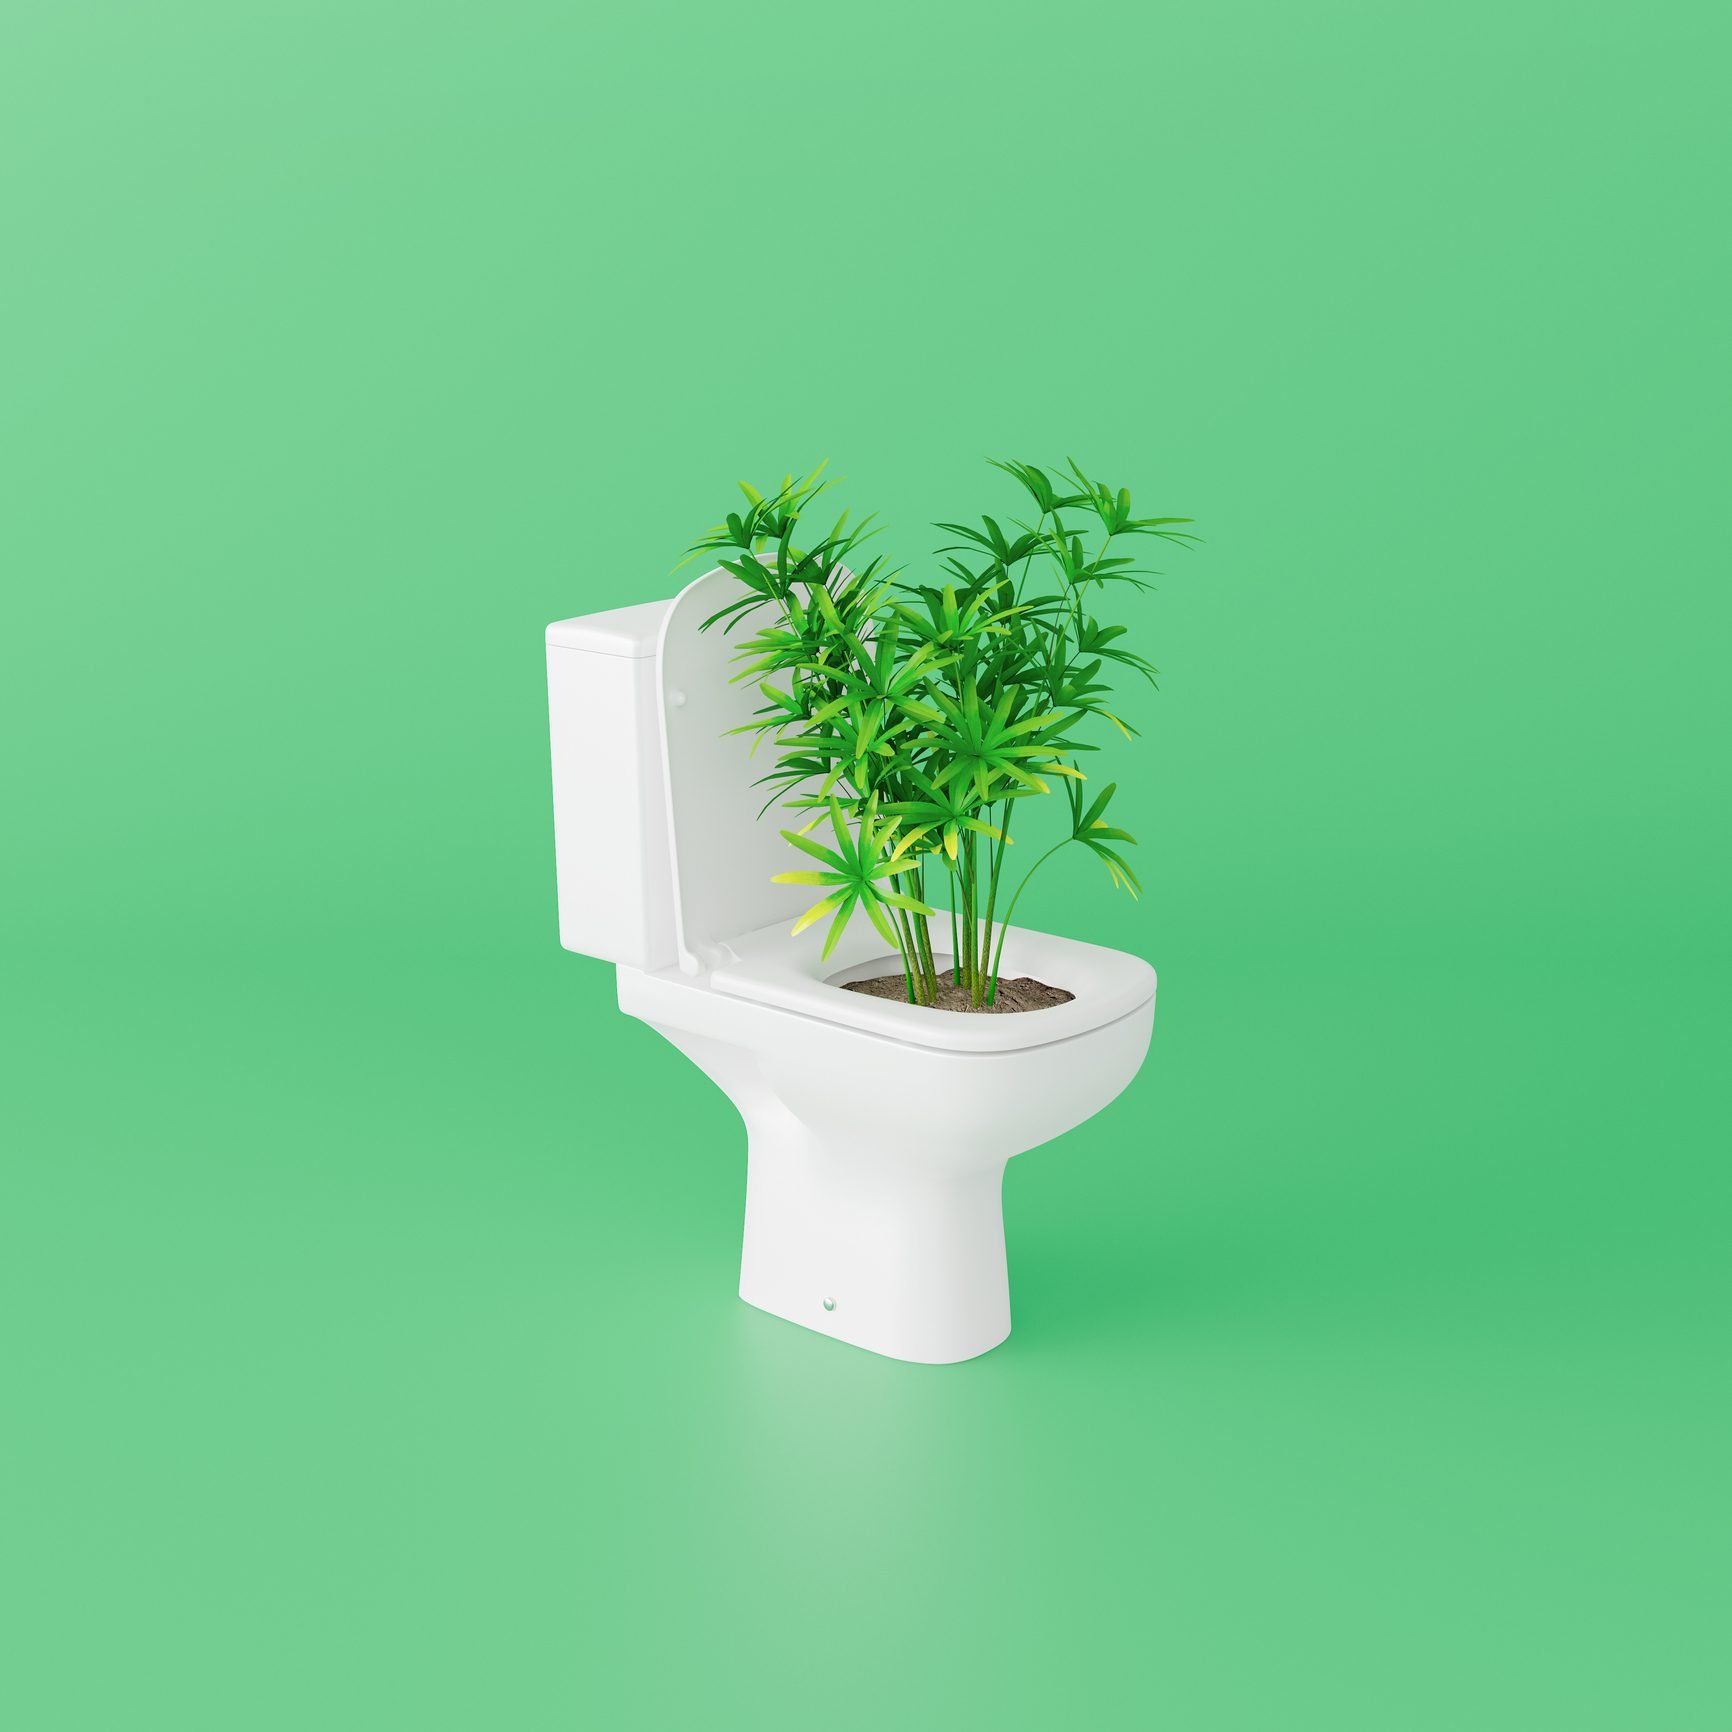 Plant Growing From Toilet On Green Background.